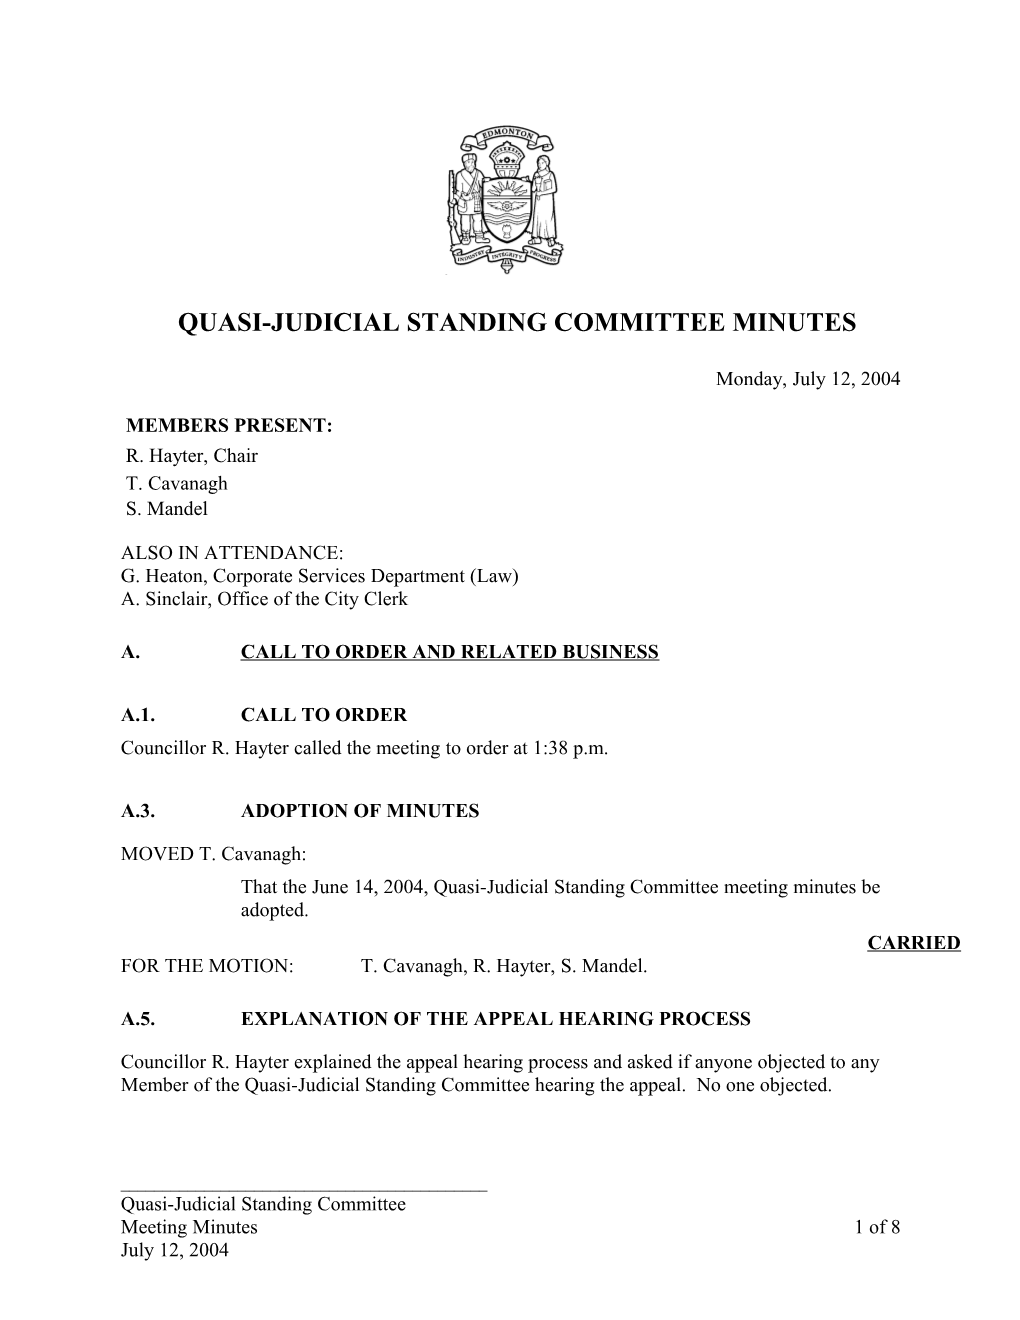 Minutes for Quasi-Judicial Standing Committee July 12, 2004 Meeting